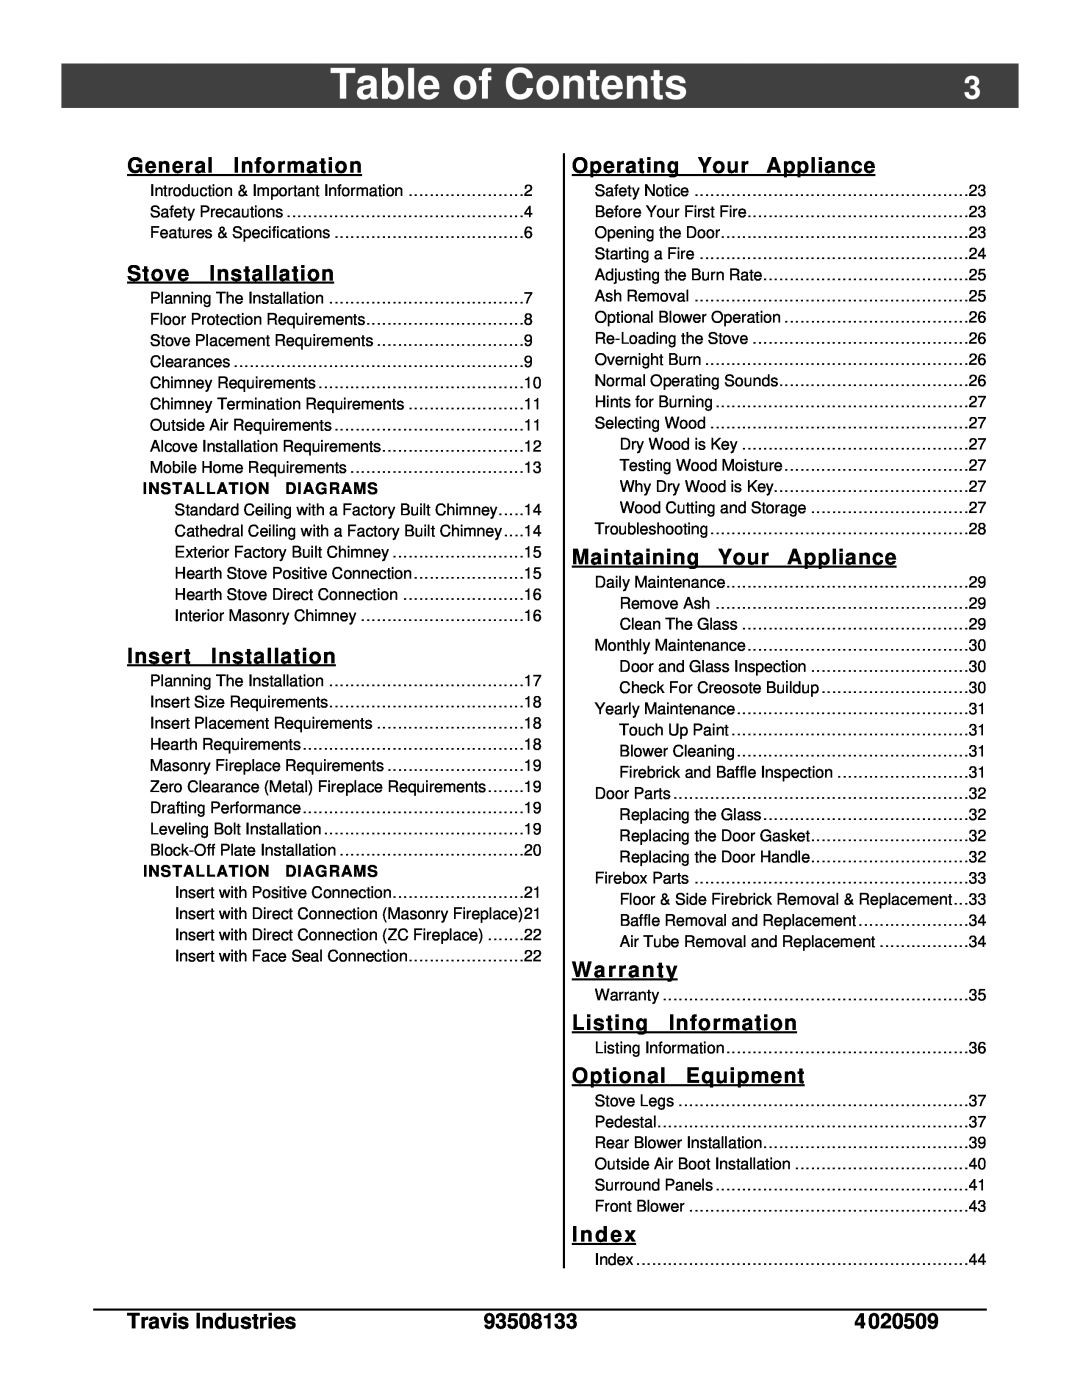 Avalon Stoves 745, 790 owner manual Table of Contents, Insert with Direct Connection Masonry Fireplace21 